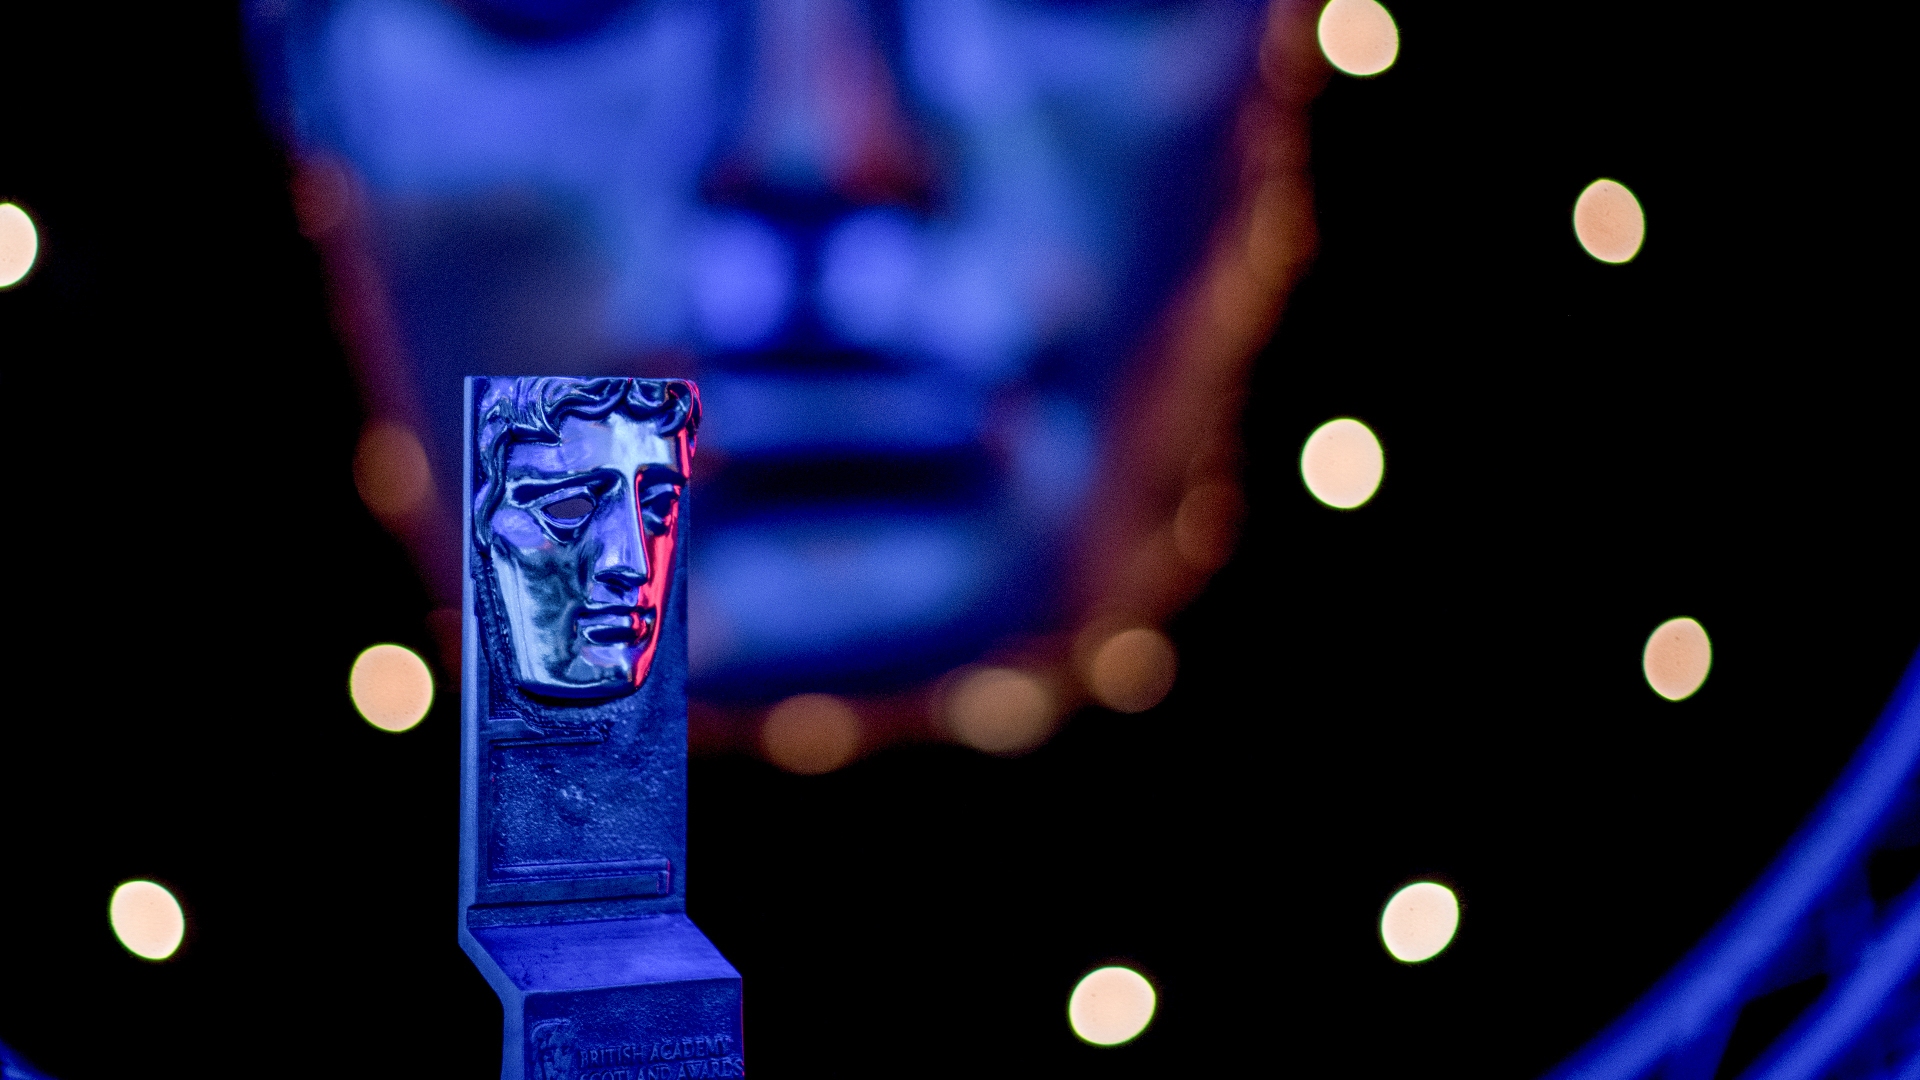 The nominations for the BAFTA Scotland Awards were unveiled on Wednesday.